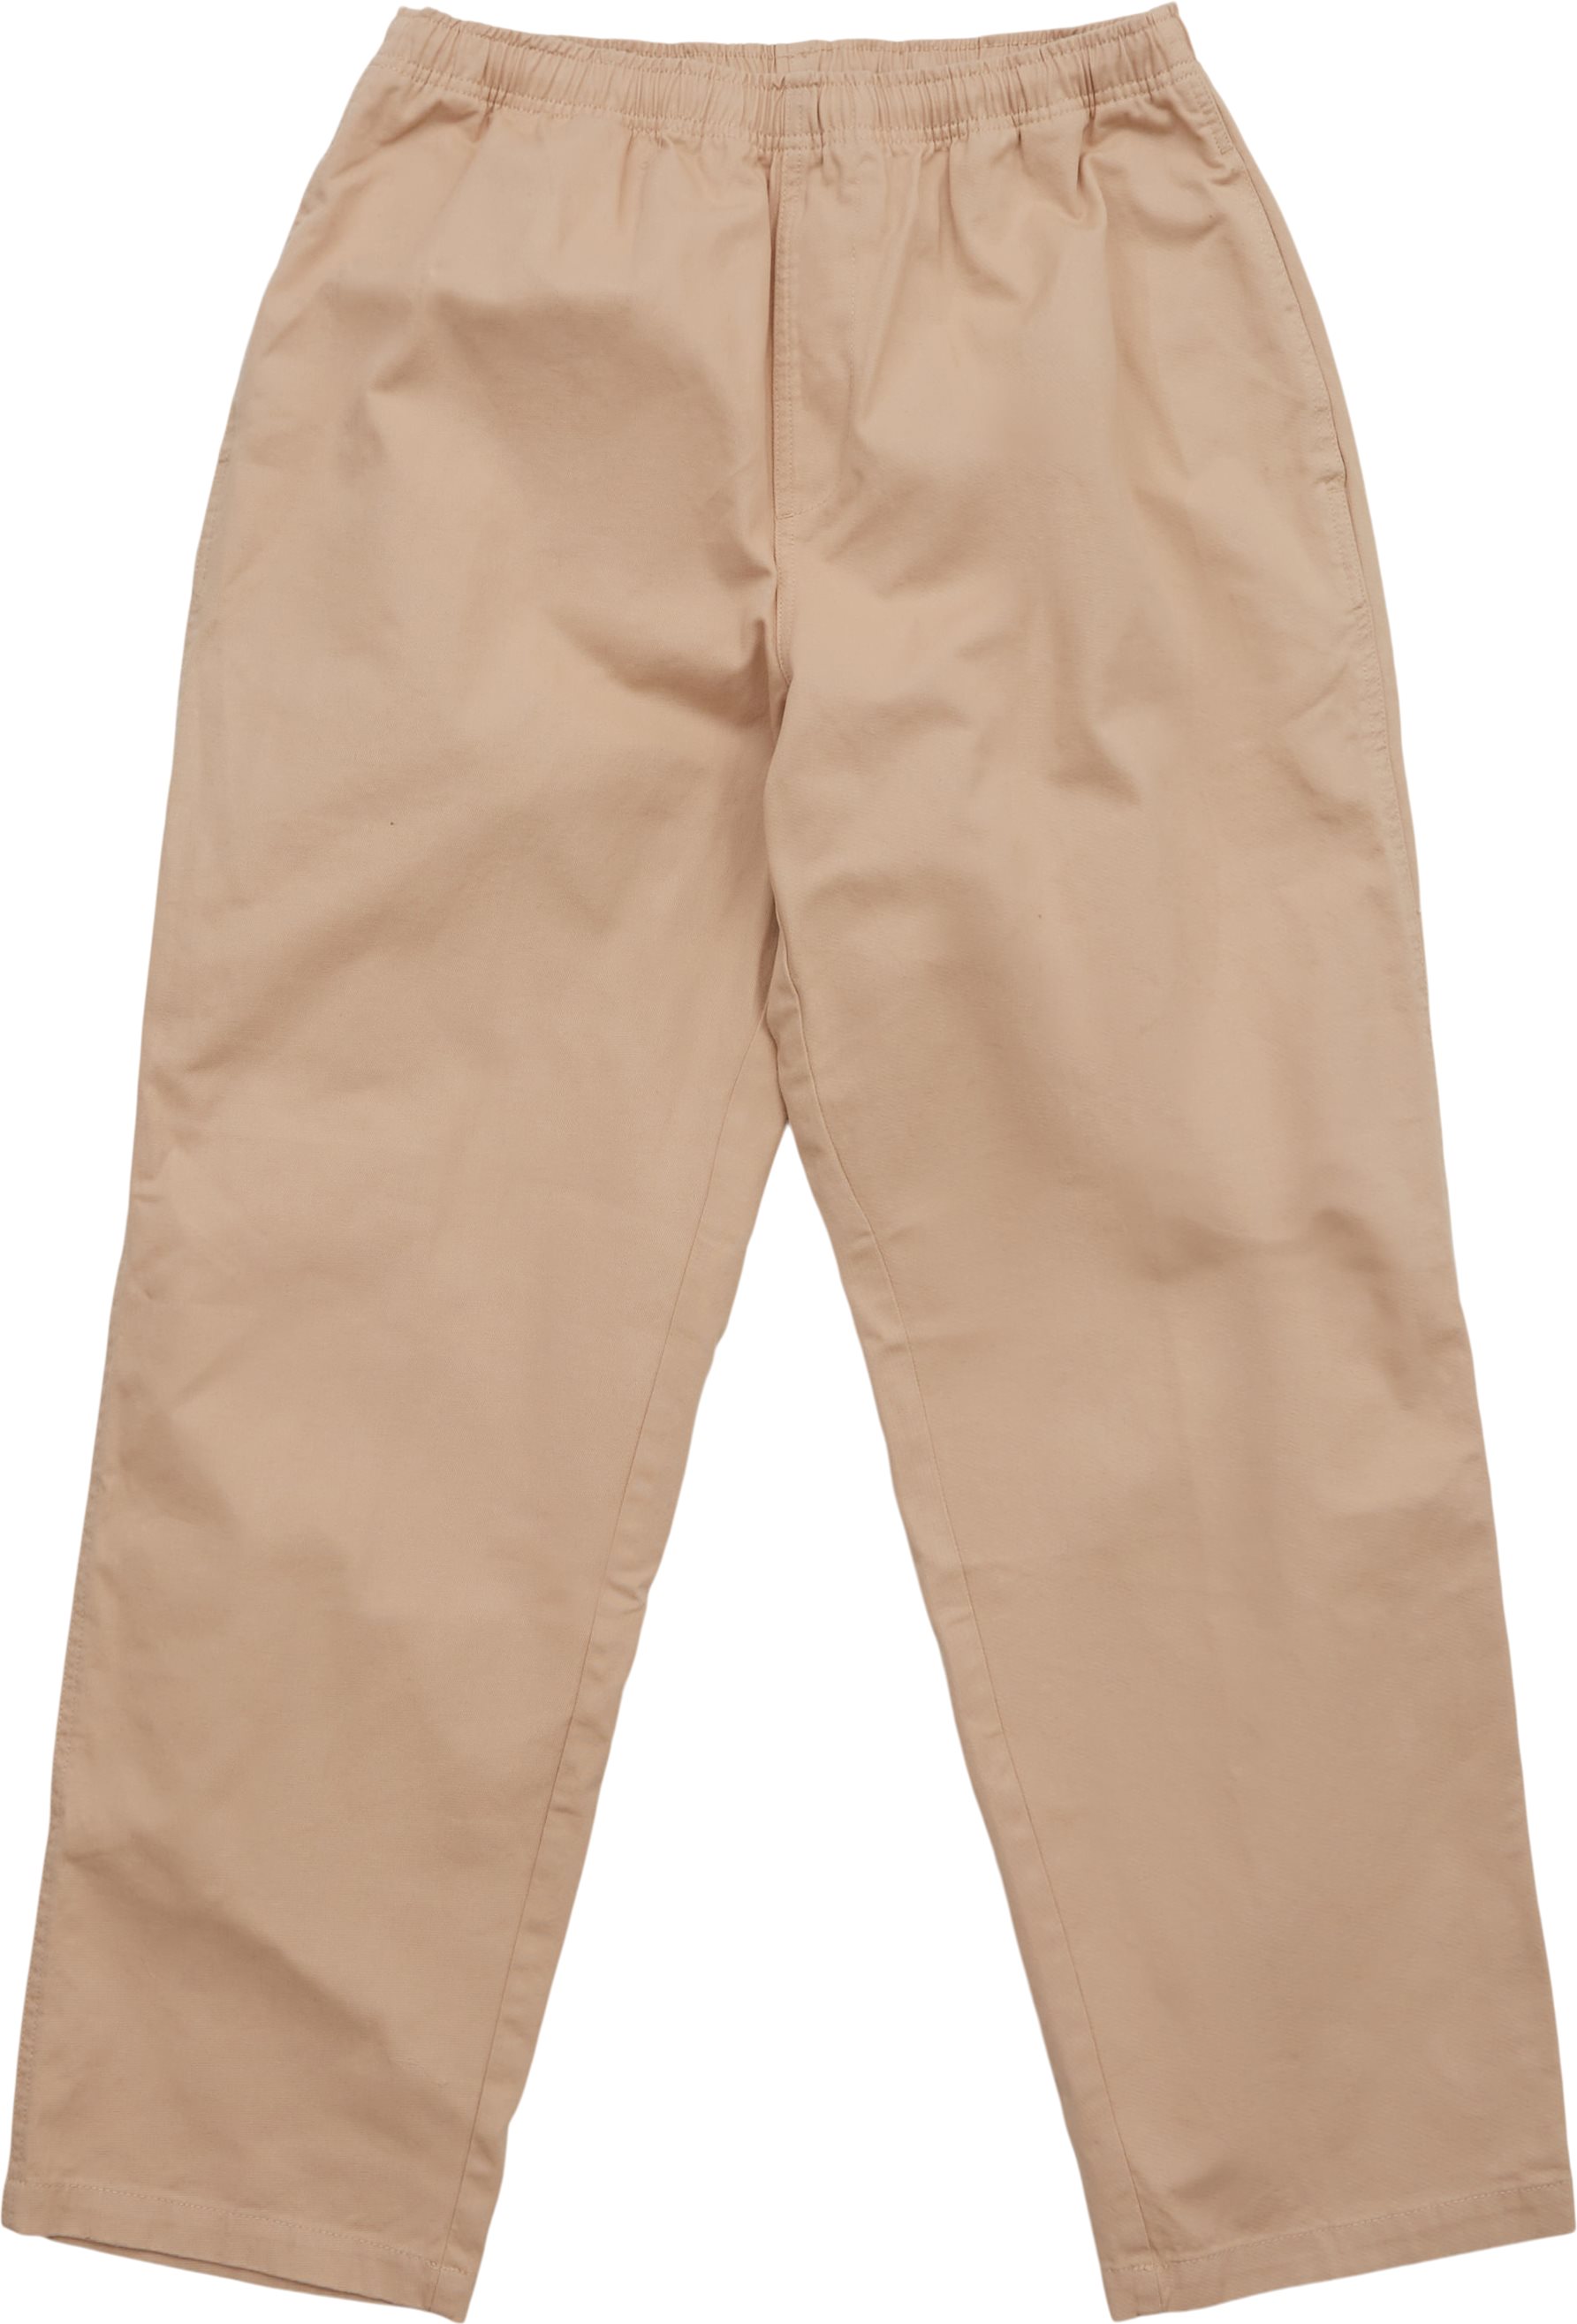 Obey Bukser EASY TWILL PANT SS23 142020142 Sand